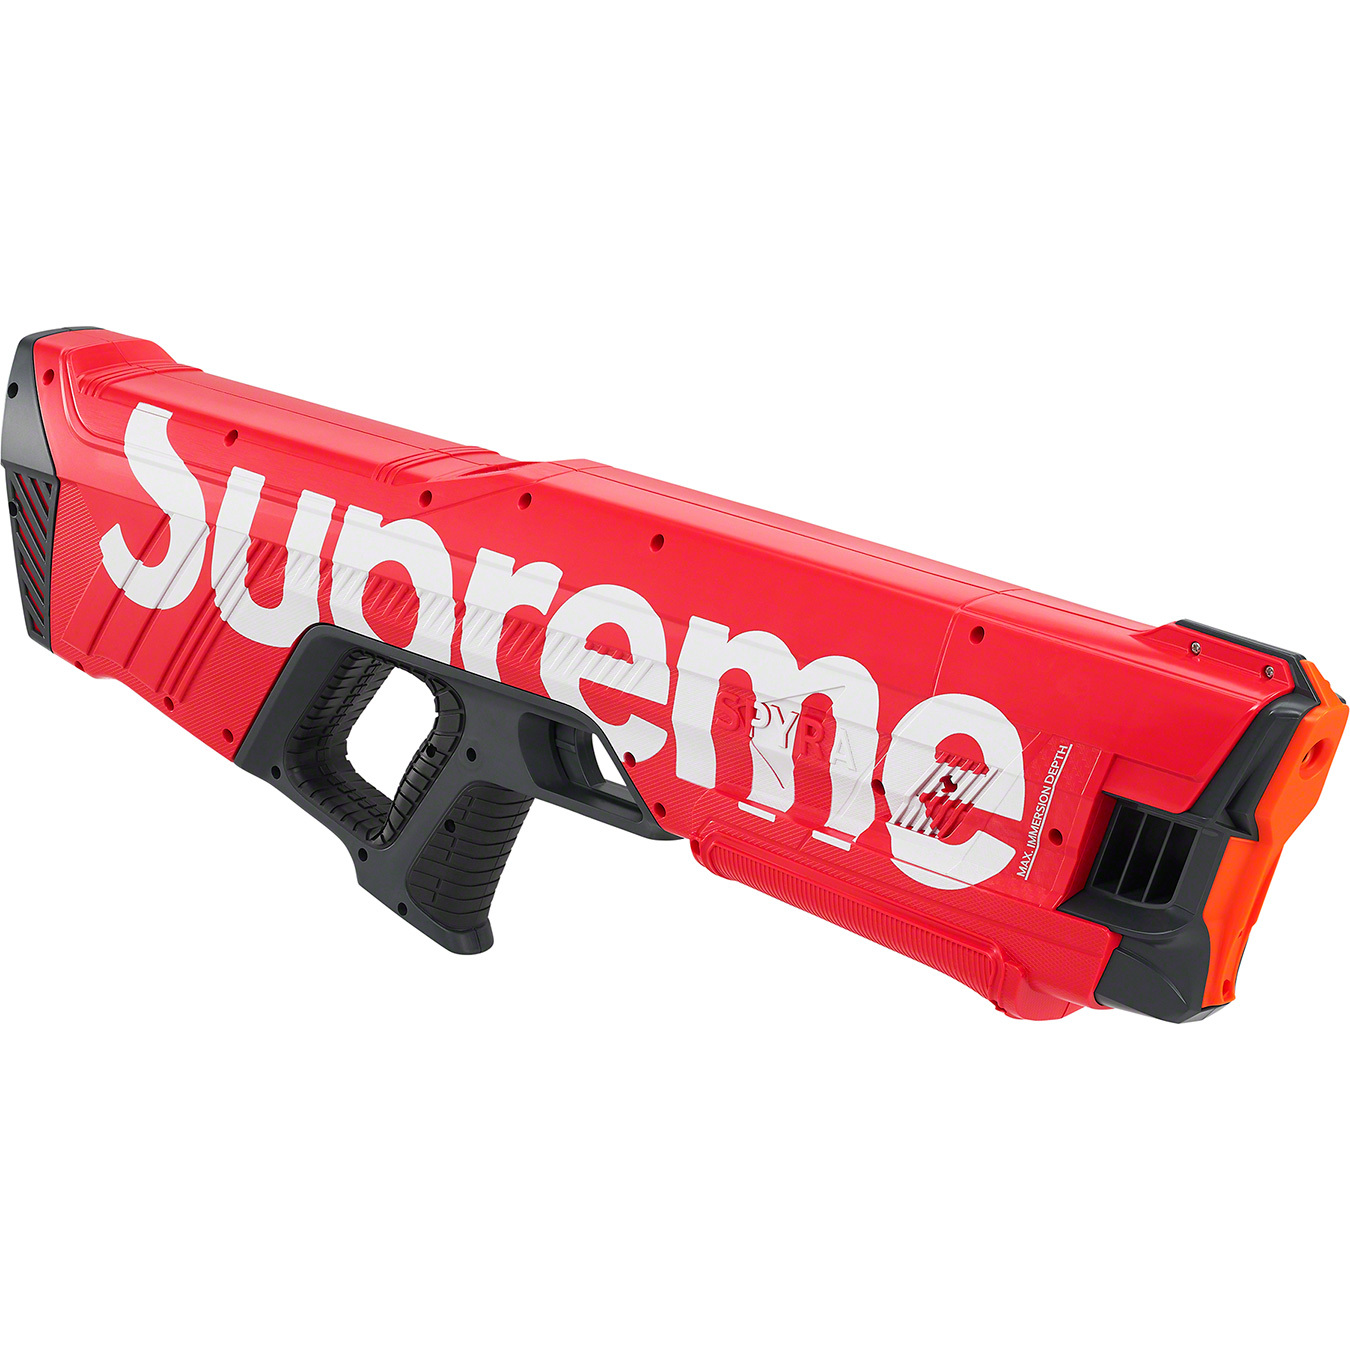 Supreme Drops on X: Supreme SpyraTwo Water Blaster is set to